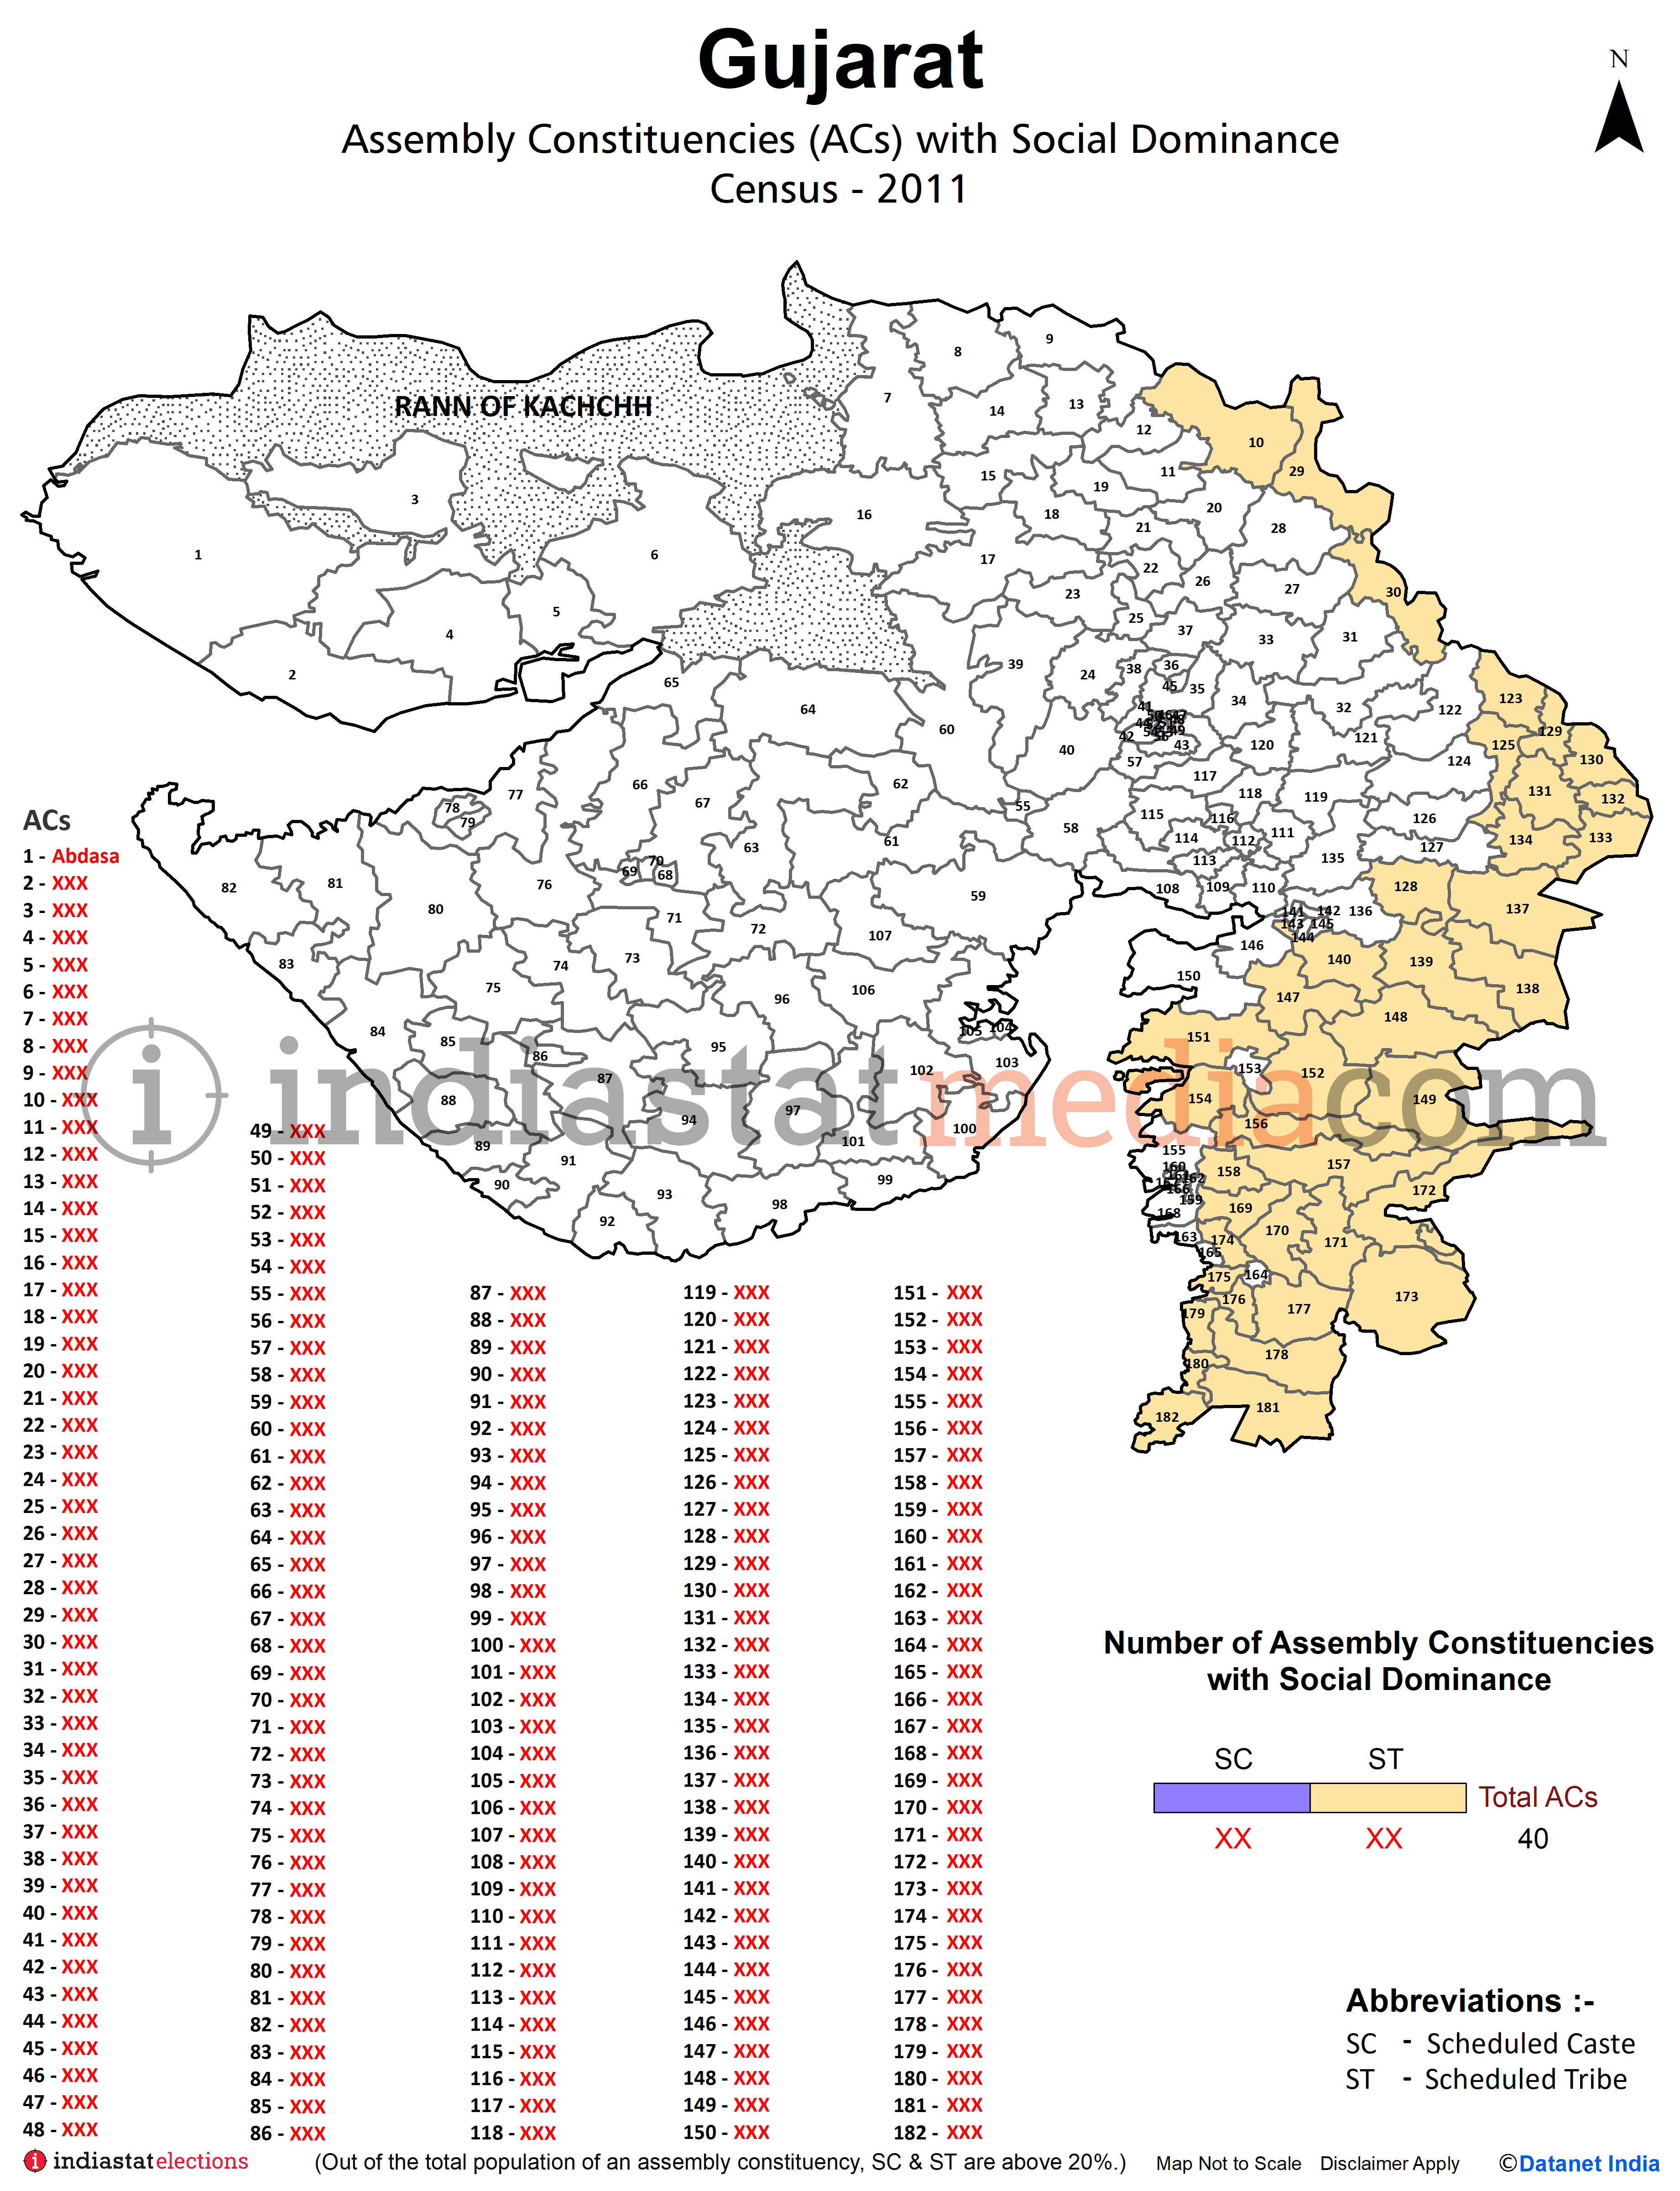 Assembly Constituencies with Social Dominance in Gujarat - Census 2011